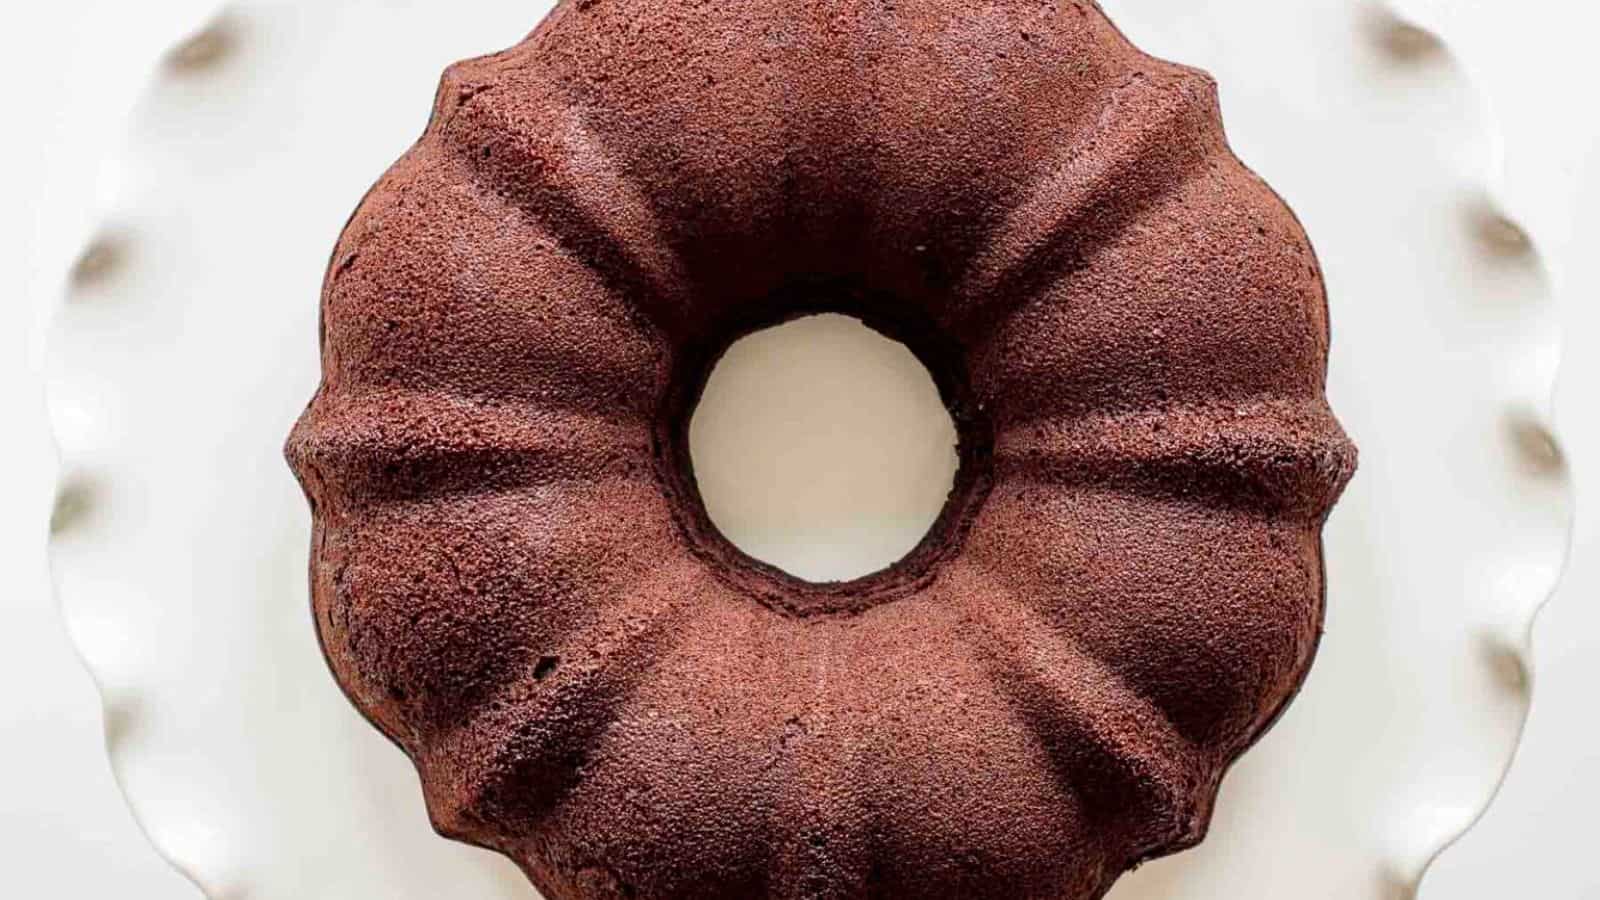 A chocolate sourdough discard cake with a hole in the middle.